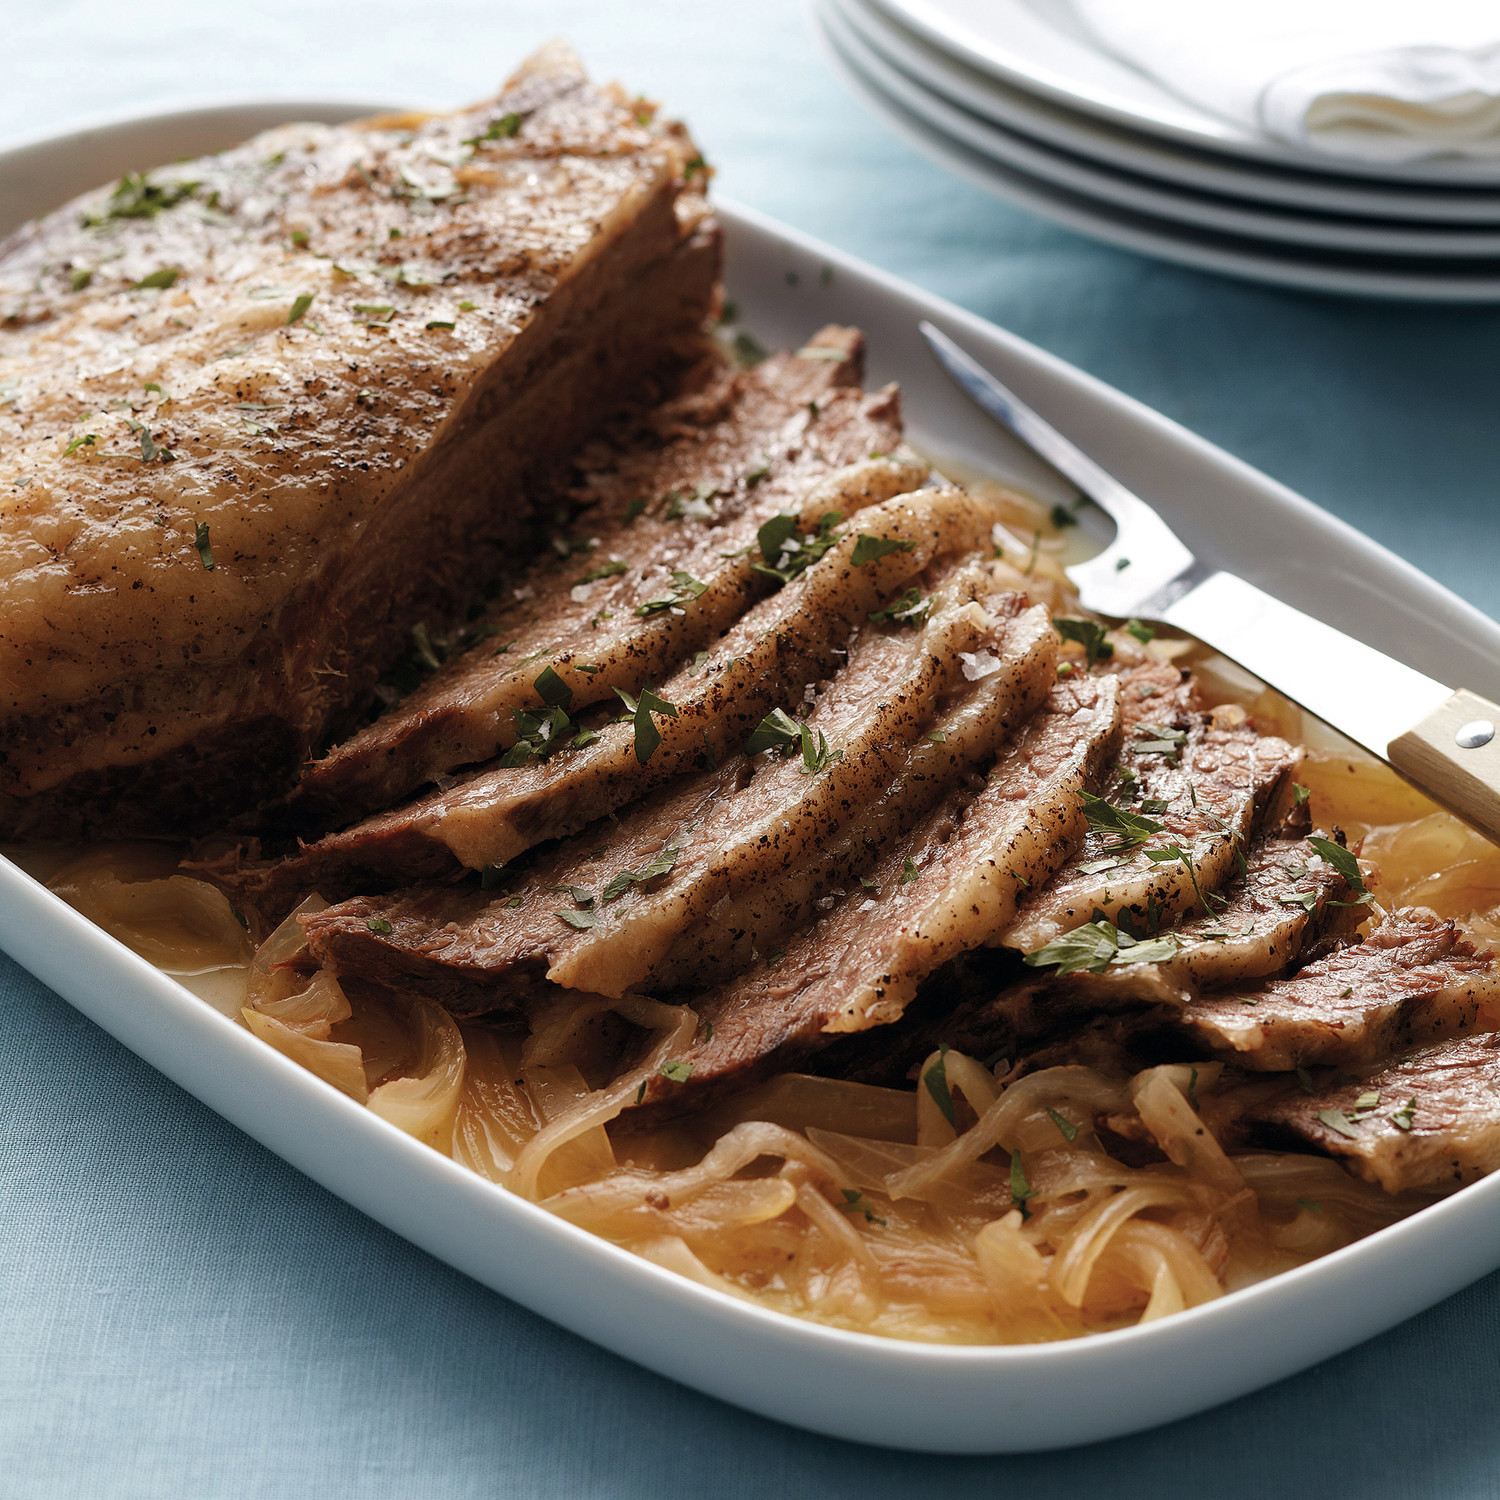 Passover Brisket Recipe Slow Cooker
 Slow Cooker Brisket and ions